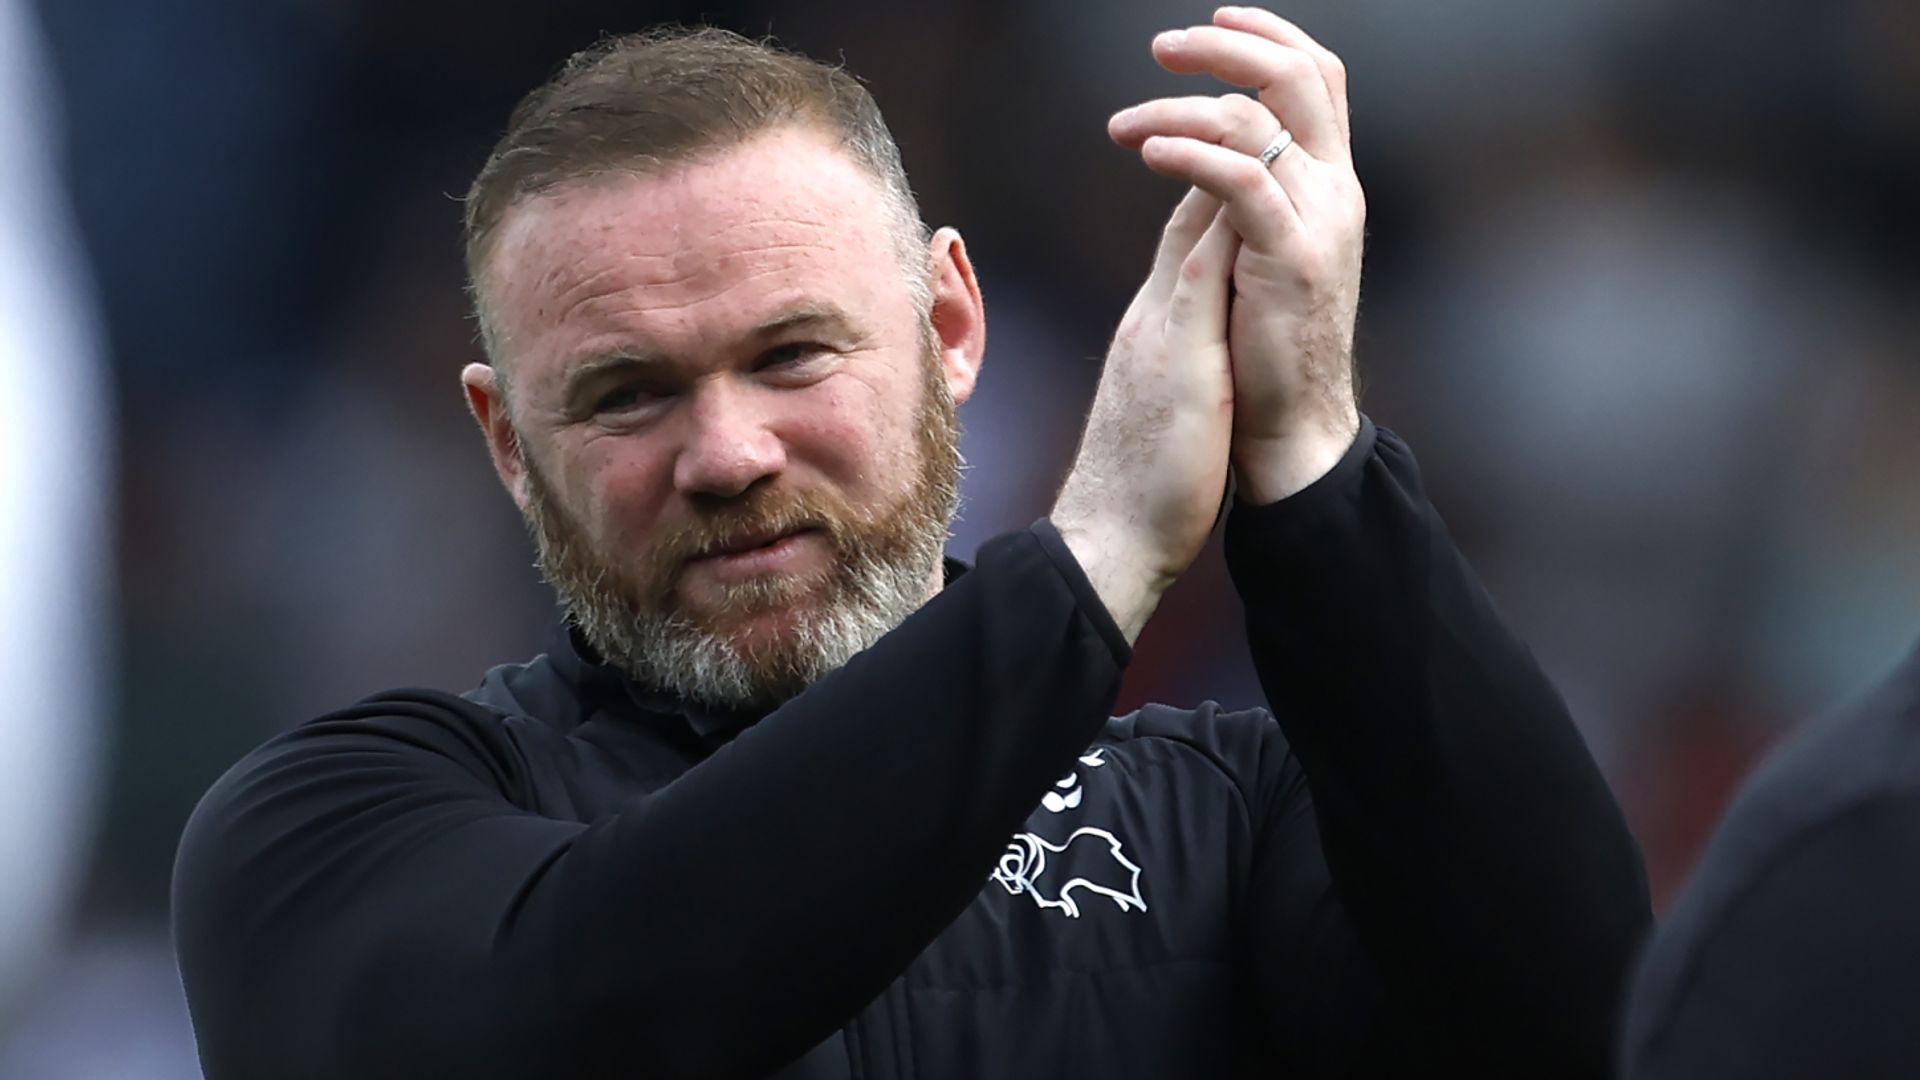 Derby relegated to third tier | Rooney: 'I want to rebuild this club'